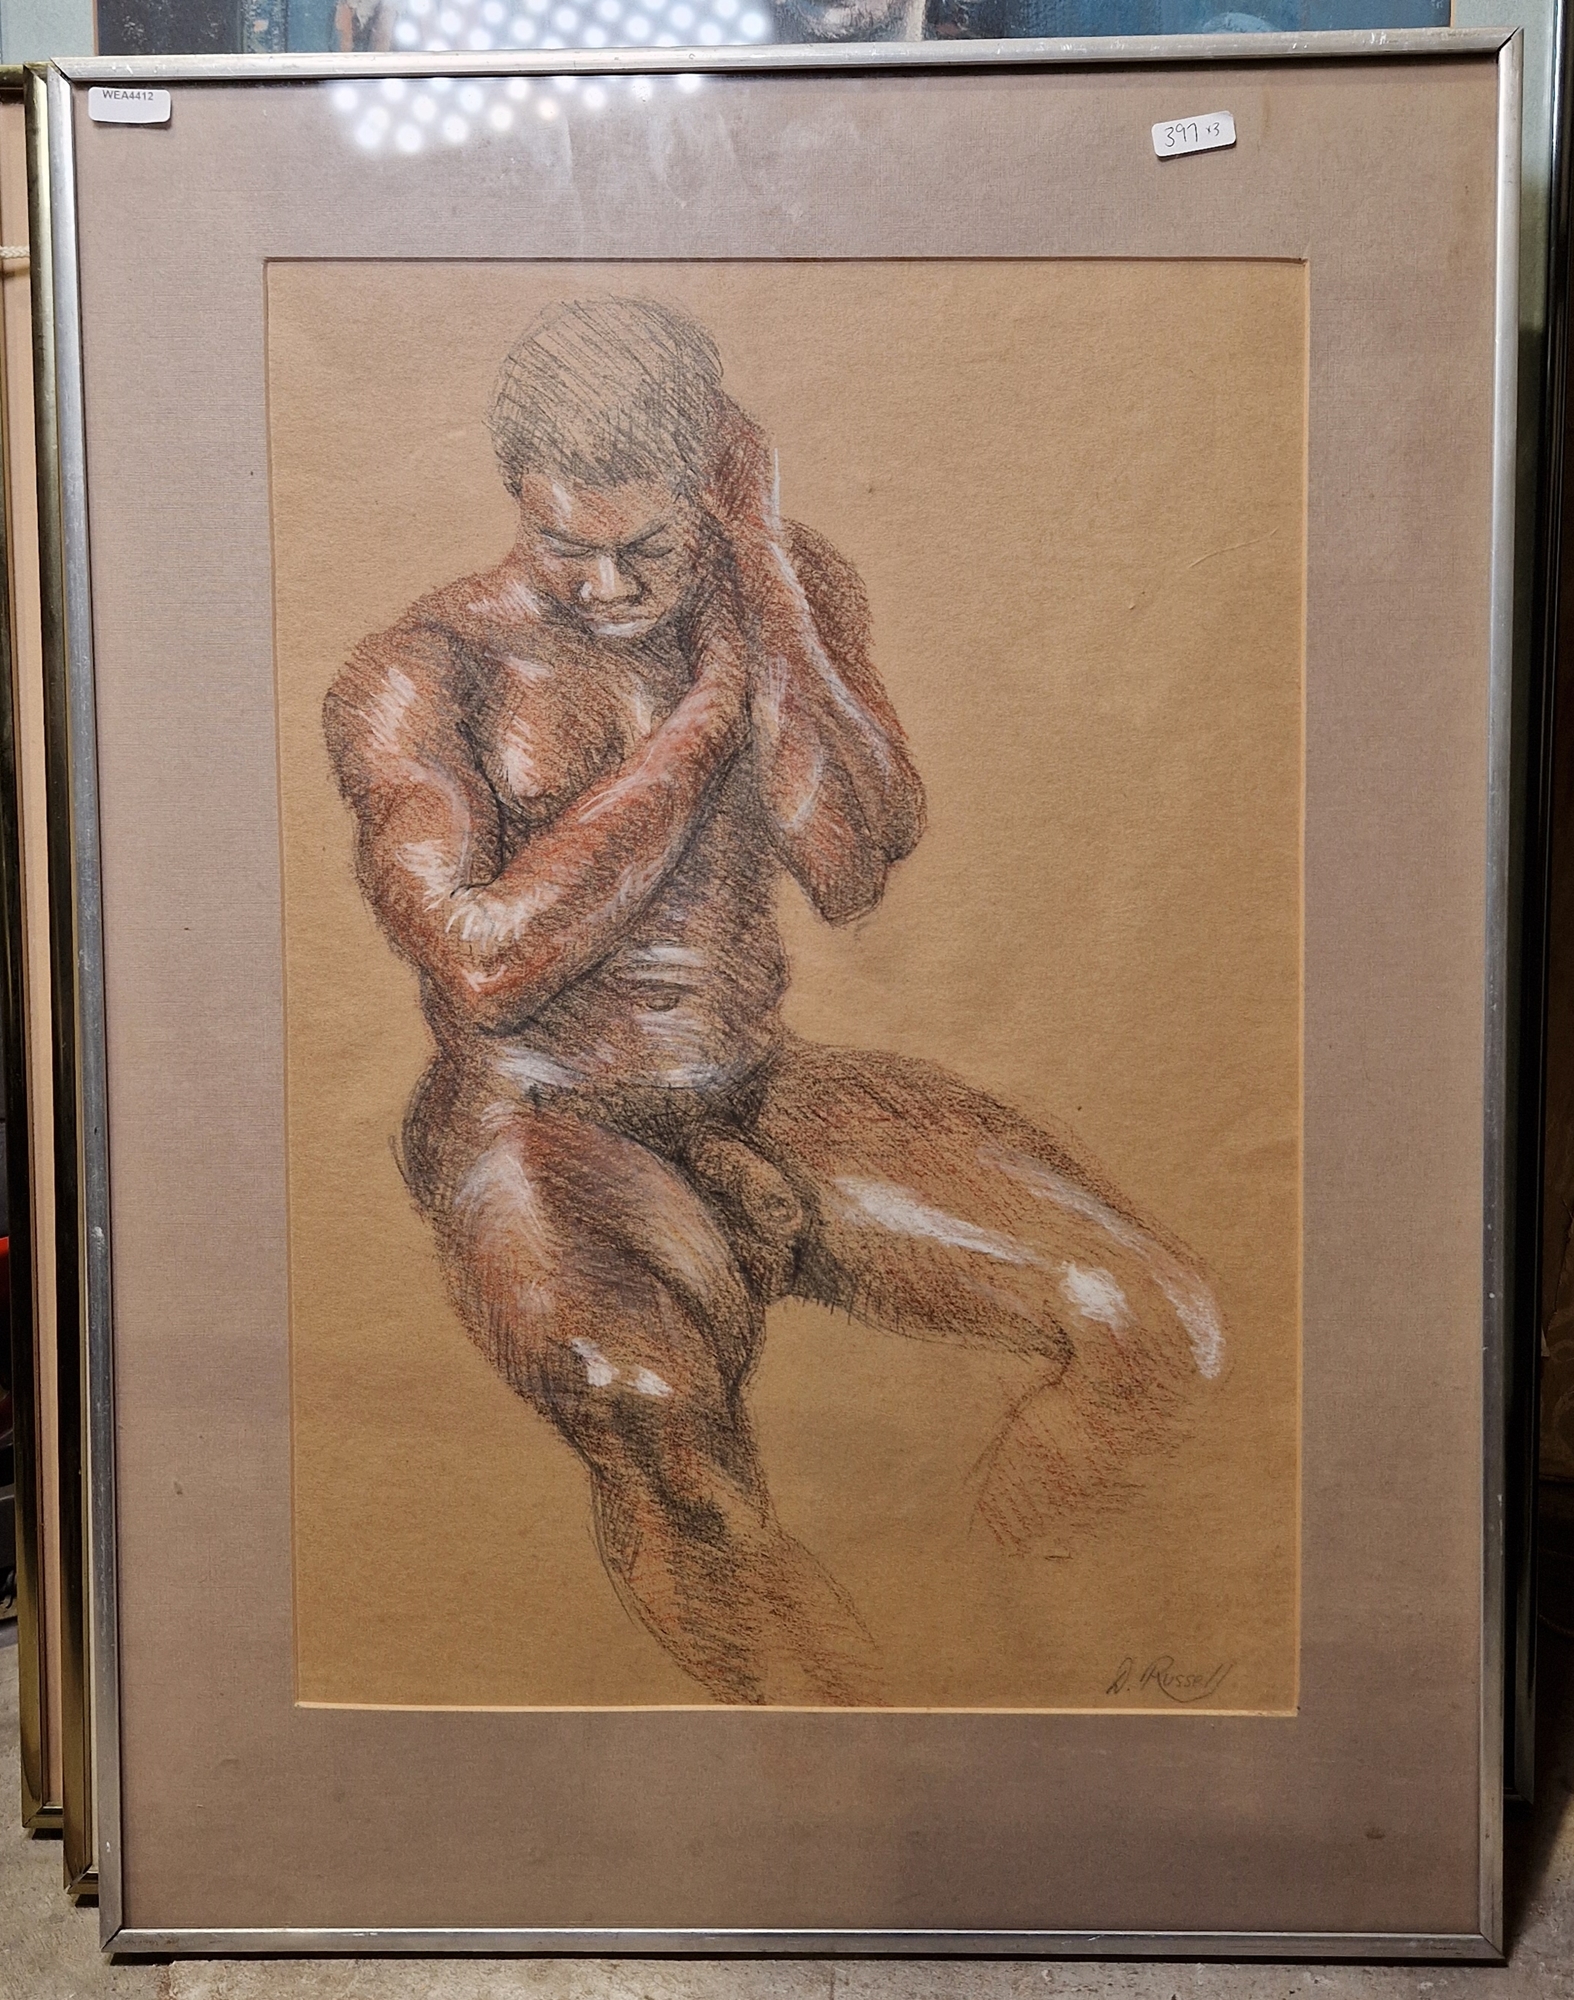 Derrick Russell (20th century) Pastel on paper Three figure studies of nude males, all signed - Image 5 of 7